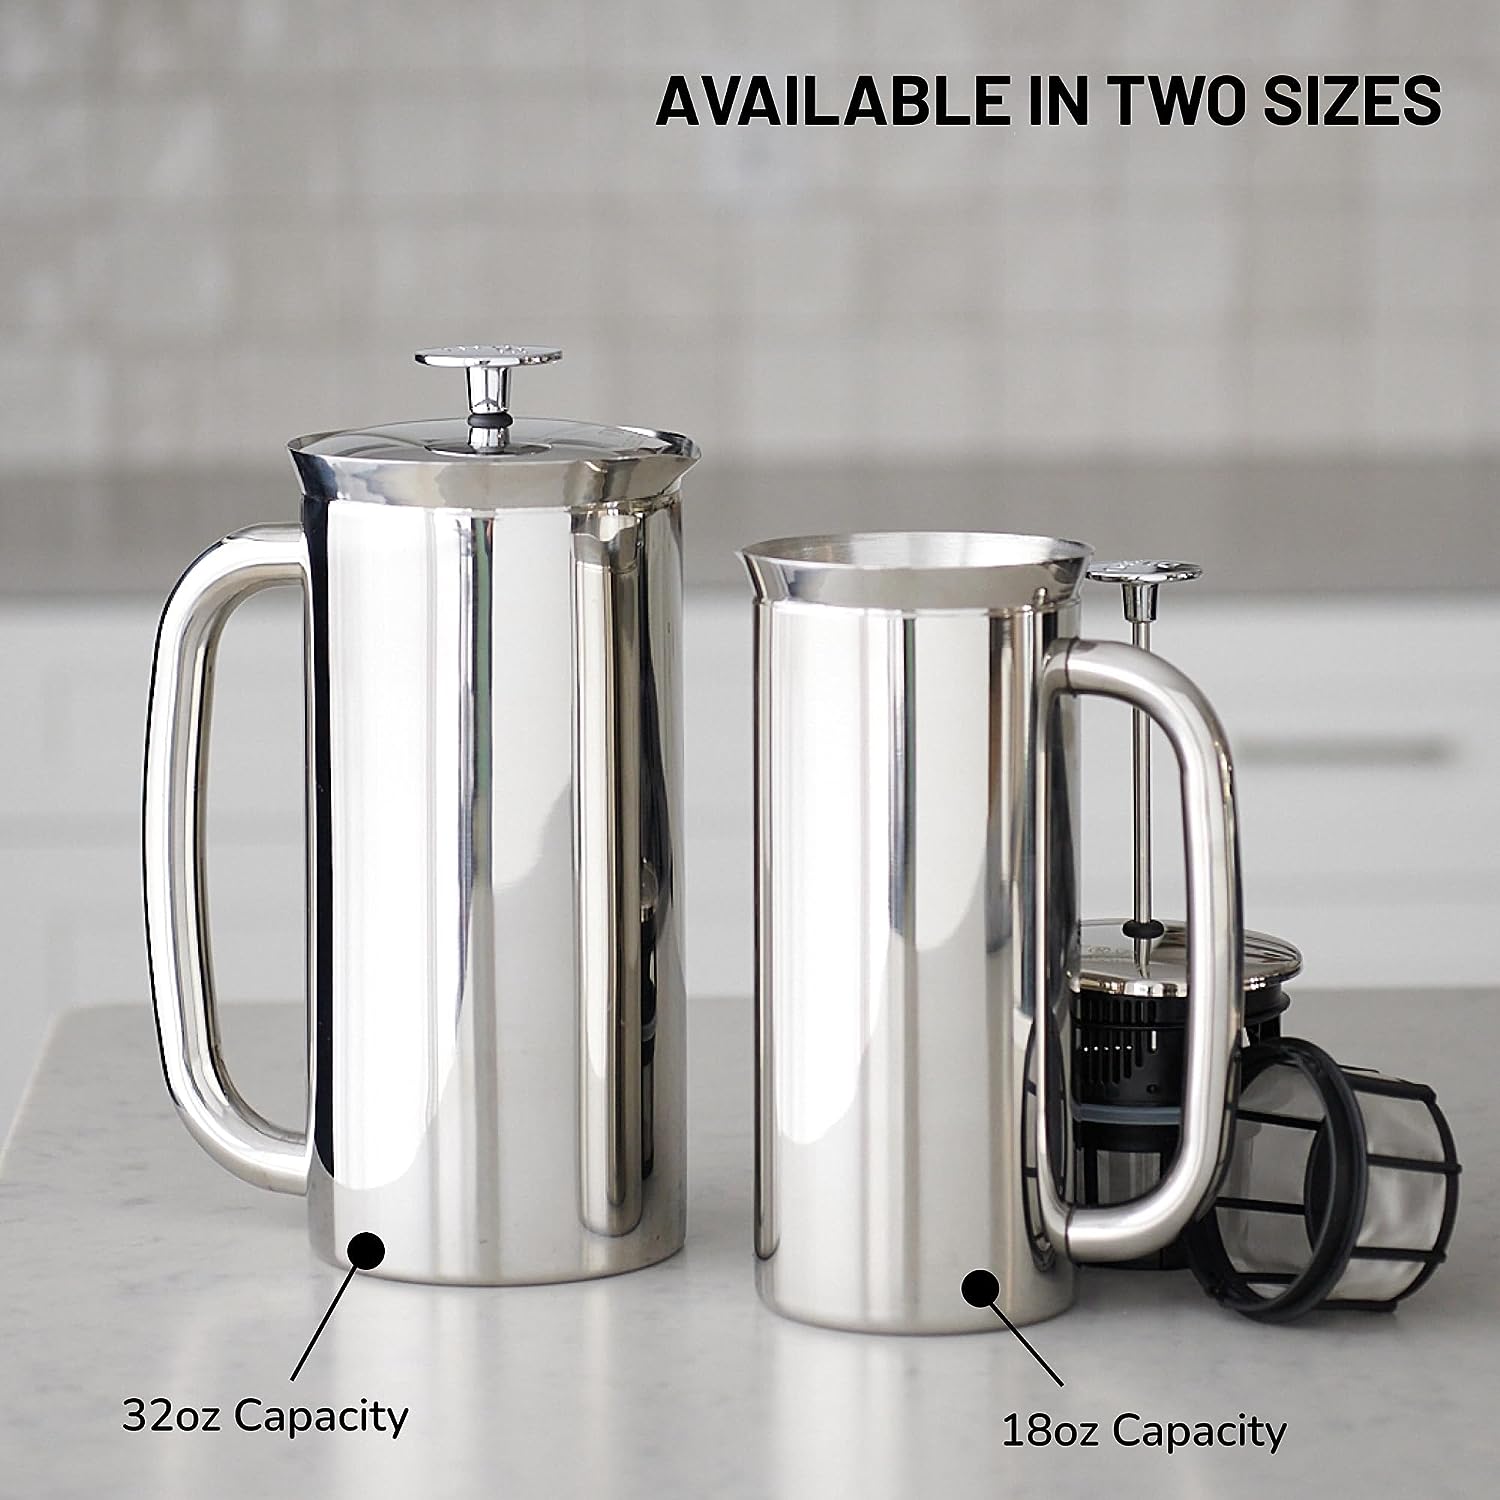 ESPRO - P7 French Press - Double Walled Stainless Steel Insulated Coffee and Tea Maker with Micro-Filter - Keep Drinks Hotter for Longer, Perfect for Home (Polished Stainless Steel, 32 Oz)